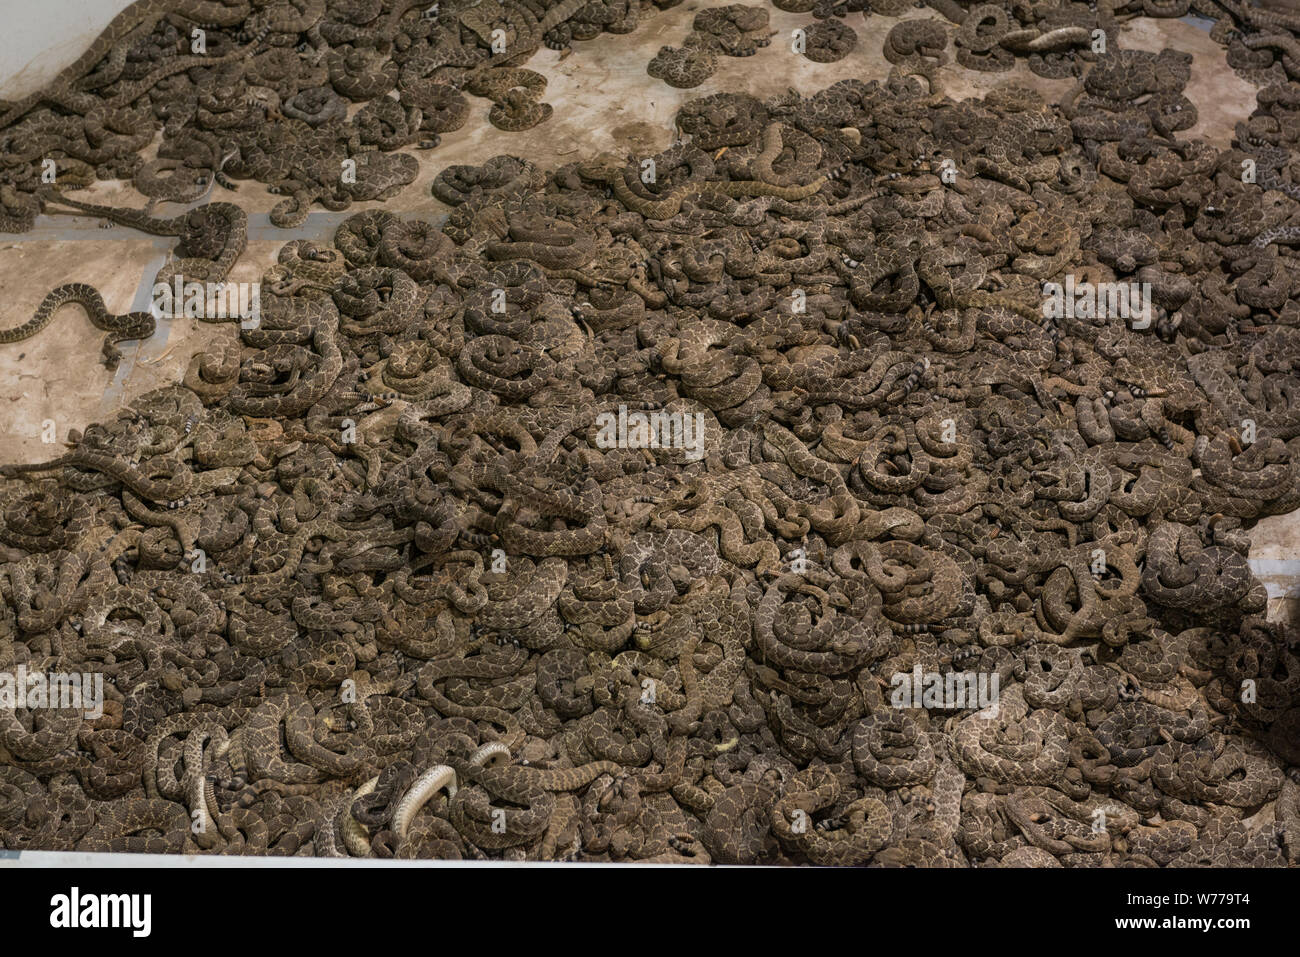 A literal pit of vipers at the World's Largest Rattlesnake Roundup in Sweetwater, Texas Physical description: 1 photograph : digital, tiff file, color.  Notes: Since 1958, the event, sponsored and run by the Sweetwater Jaycees, has been held annually in March at the Nolan County Coliseum. The Round-Up was started as a way to control the population of snakes in their brushy area of Texas. According to the Jaycees, the large population of rattlesnakes was harming local farmers and ranchers who were losing their livestock to these natural predators. Today, the round-up attracts tens of thousands Stock Photo